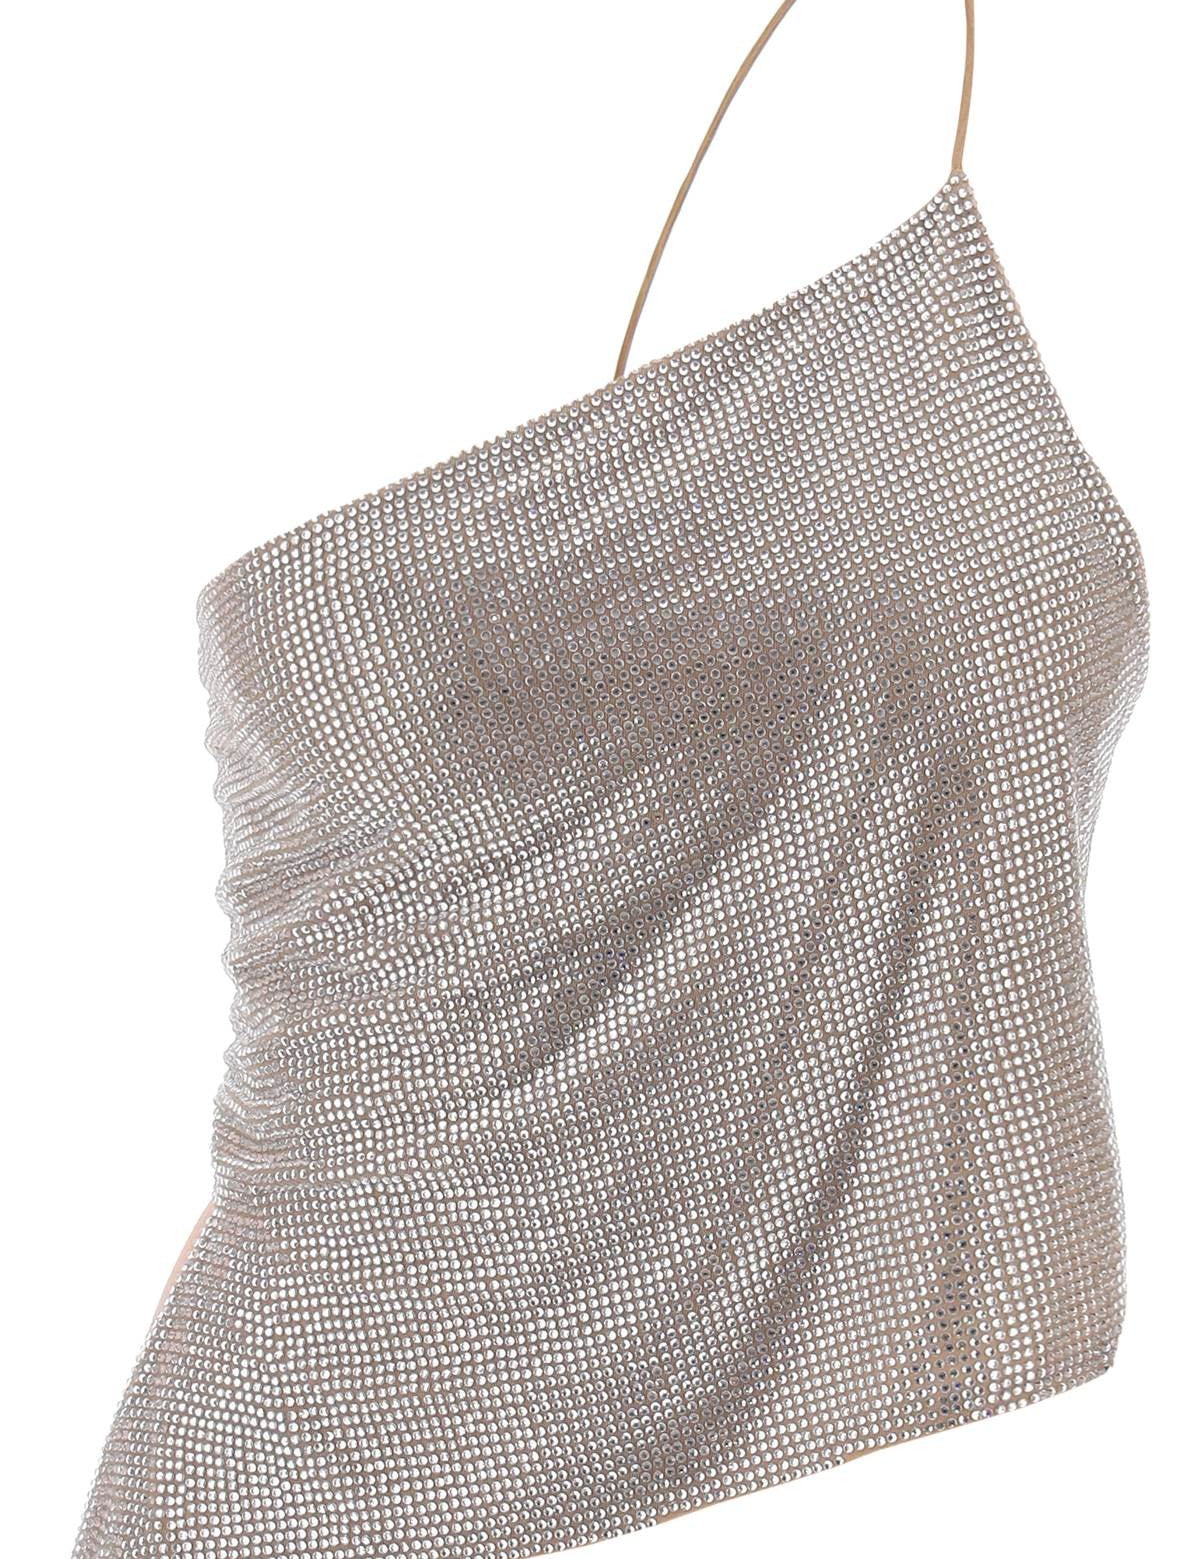 giuseppe-di-morabito-cropped-top-in-mesh-with-crystals-all-over.jpg